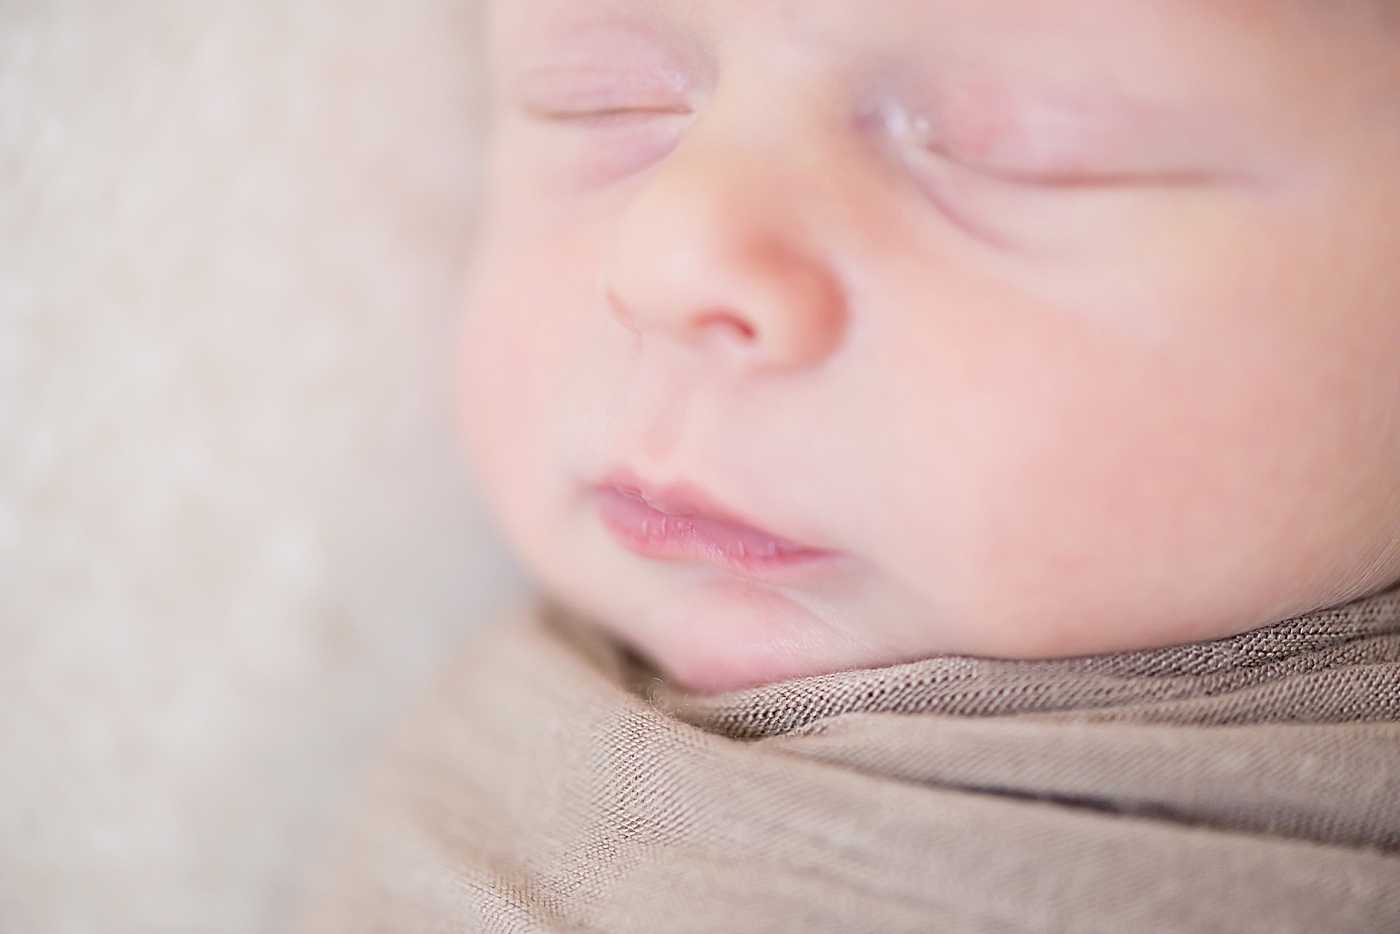 Baby boy sleeping wrapped in soft brown swaddle | Photo by Anna Wisjo